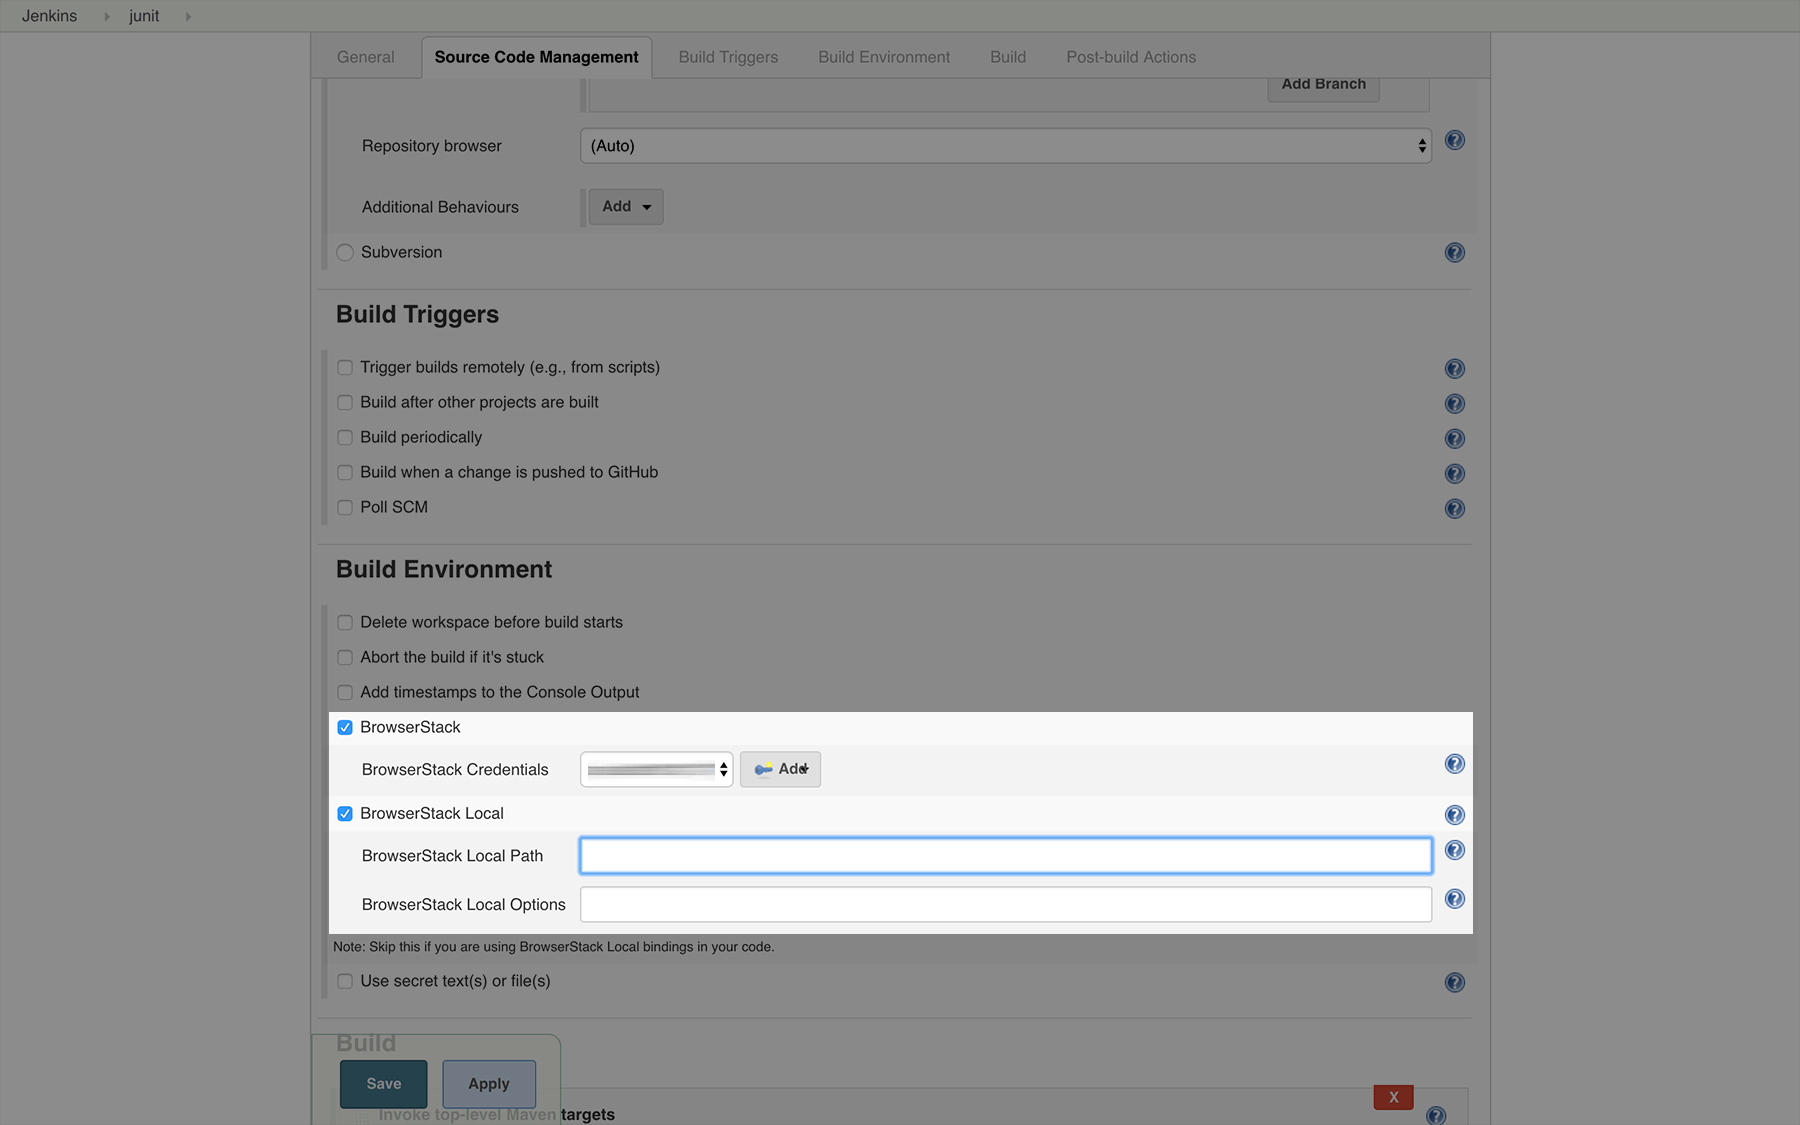 BrowserStackLocal checkbox under Build Environment Section